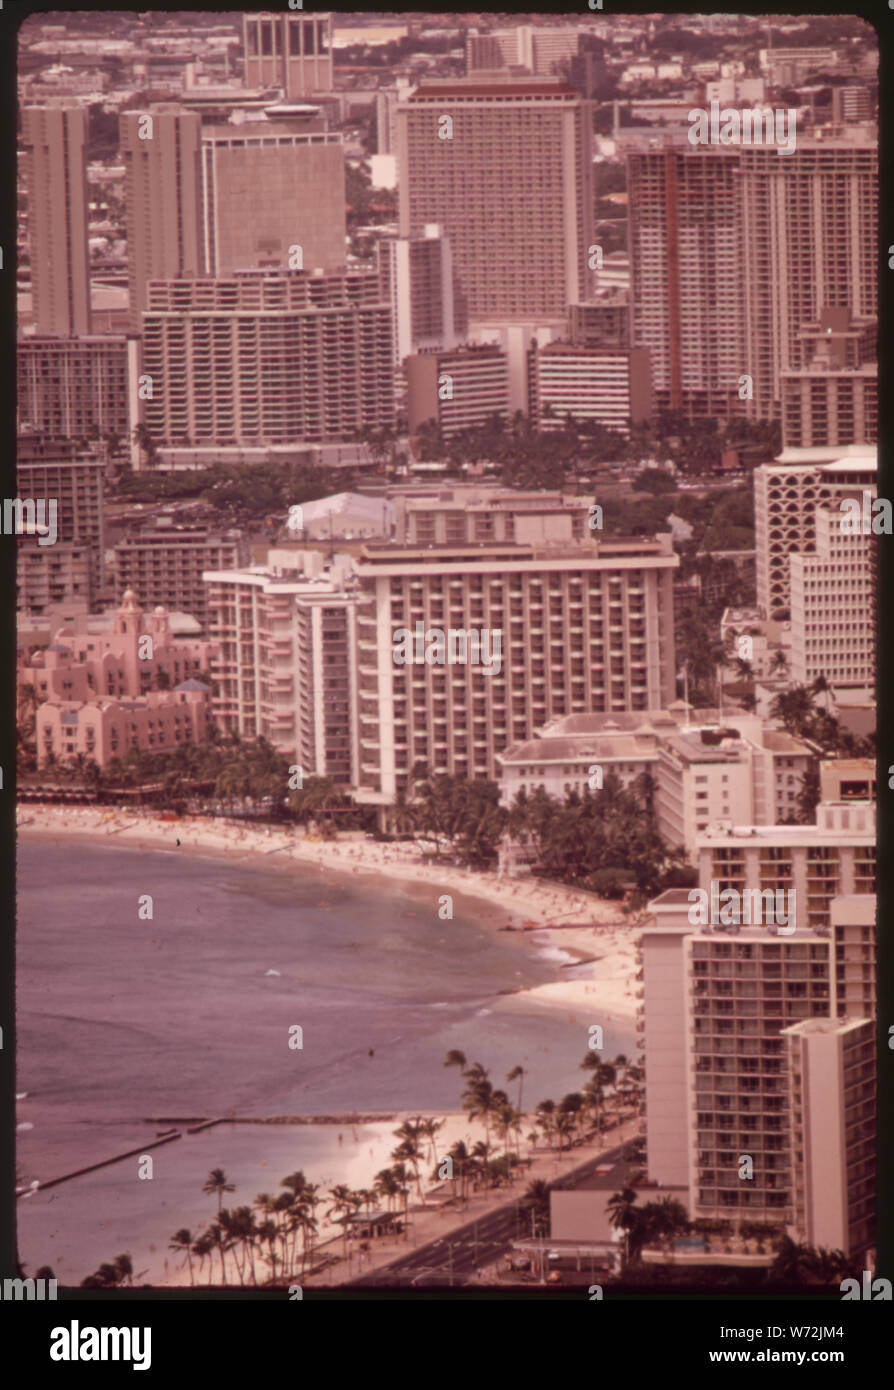 MASSED HIGHRISES OF WAIKIKI DISTRICT, FAVORITE OF TOURISTS SEEN FROM TOP OF DIAMOND HEAD, THE FAMOUS EXTINCT VOLCANO. THE WAIKIKI IMPROVEMENT ASSOCIATION HAS FORMED AN ARCHITECTURAL DESIGN REVIEW BOARD TO OVERSEE SUCH BUILDING, BUT IT IS PROBABLY TOO LATE. IN 1963 THERE WERE 9,203 HOTEL ROOMS IN ALL OF OAHU ISLAND. TODAY THERE ARE SOME 26,000 ROOMS, MOST OF THEM HERE IN WAIKIKI Stock Photo